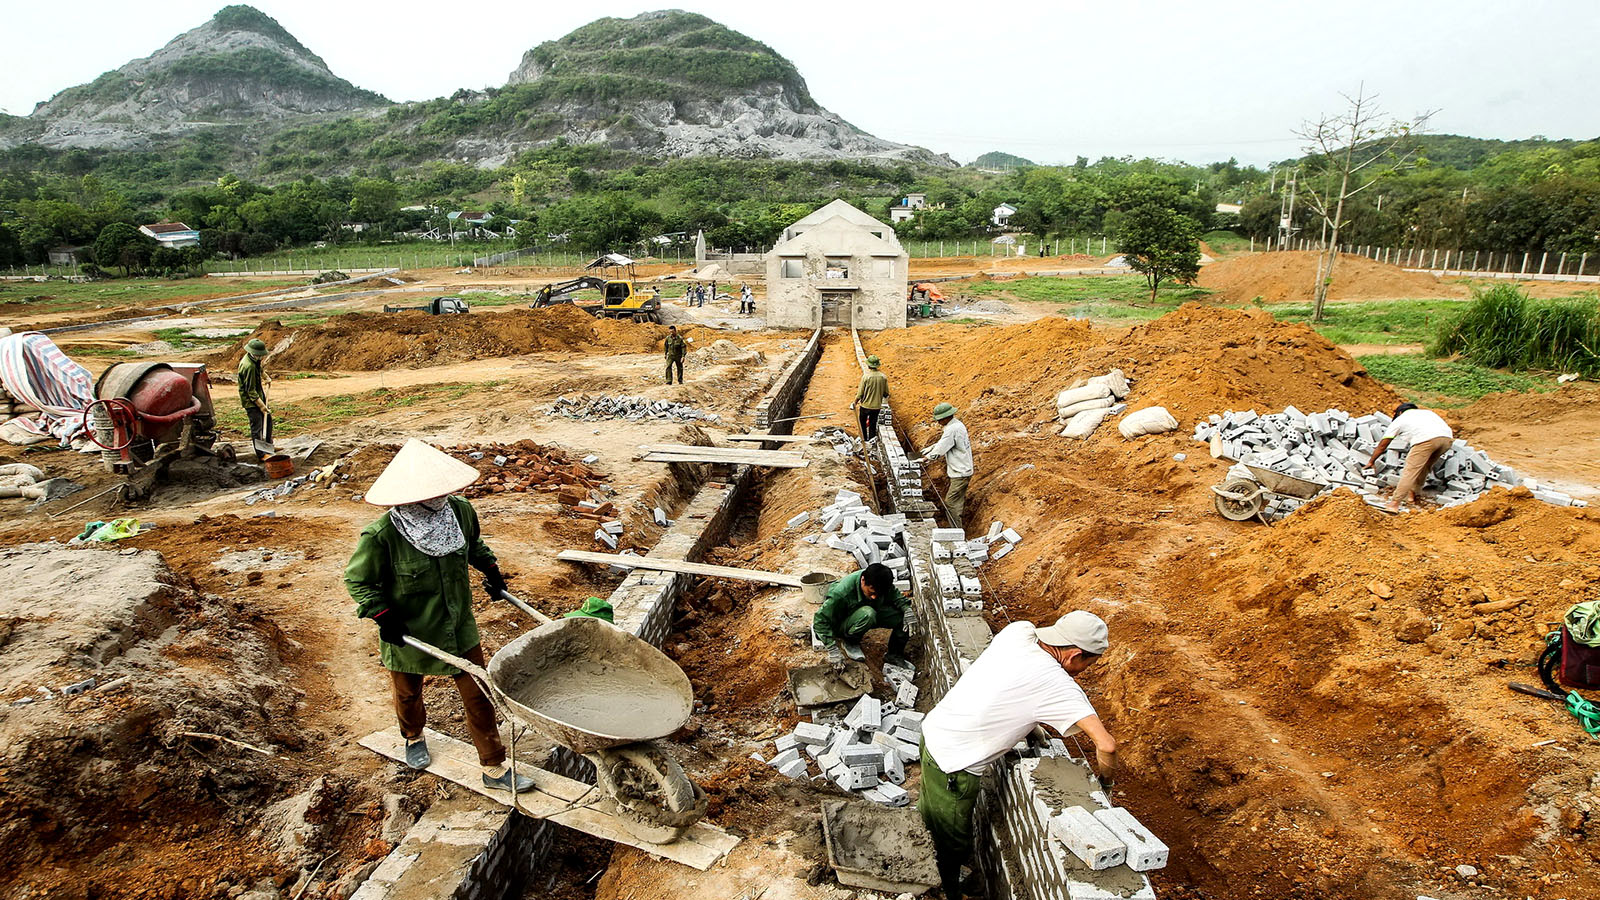 A wildlife sanctuary is being built in Ninh Binh Province. Photo: Tuoi Tre